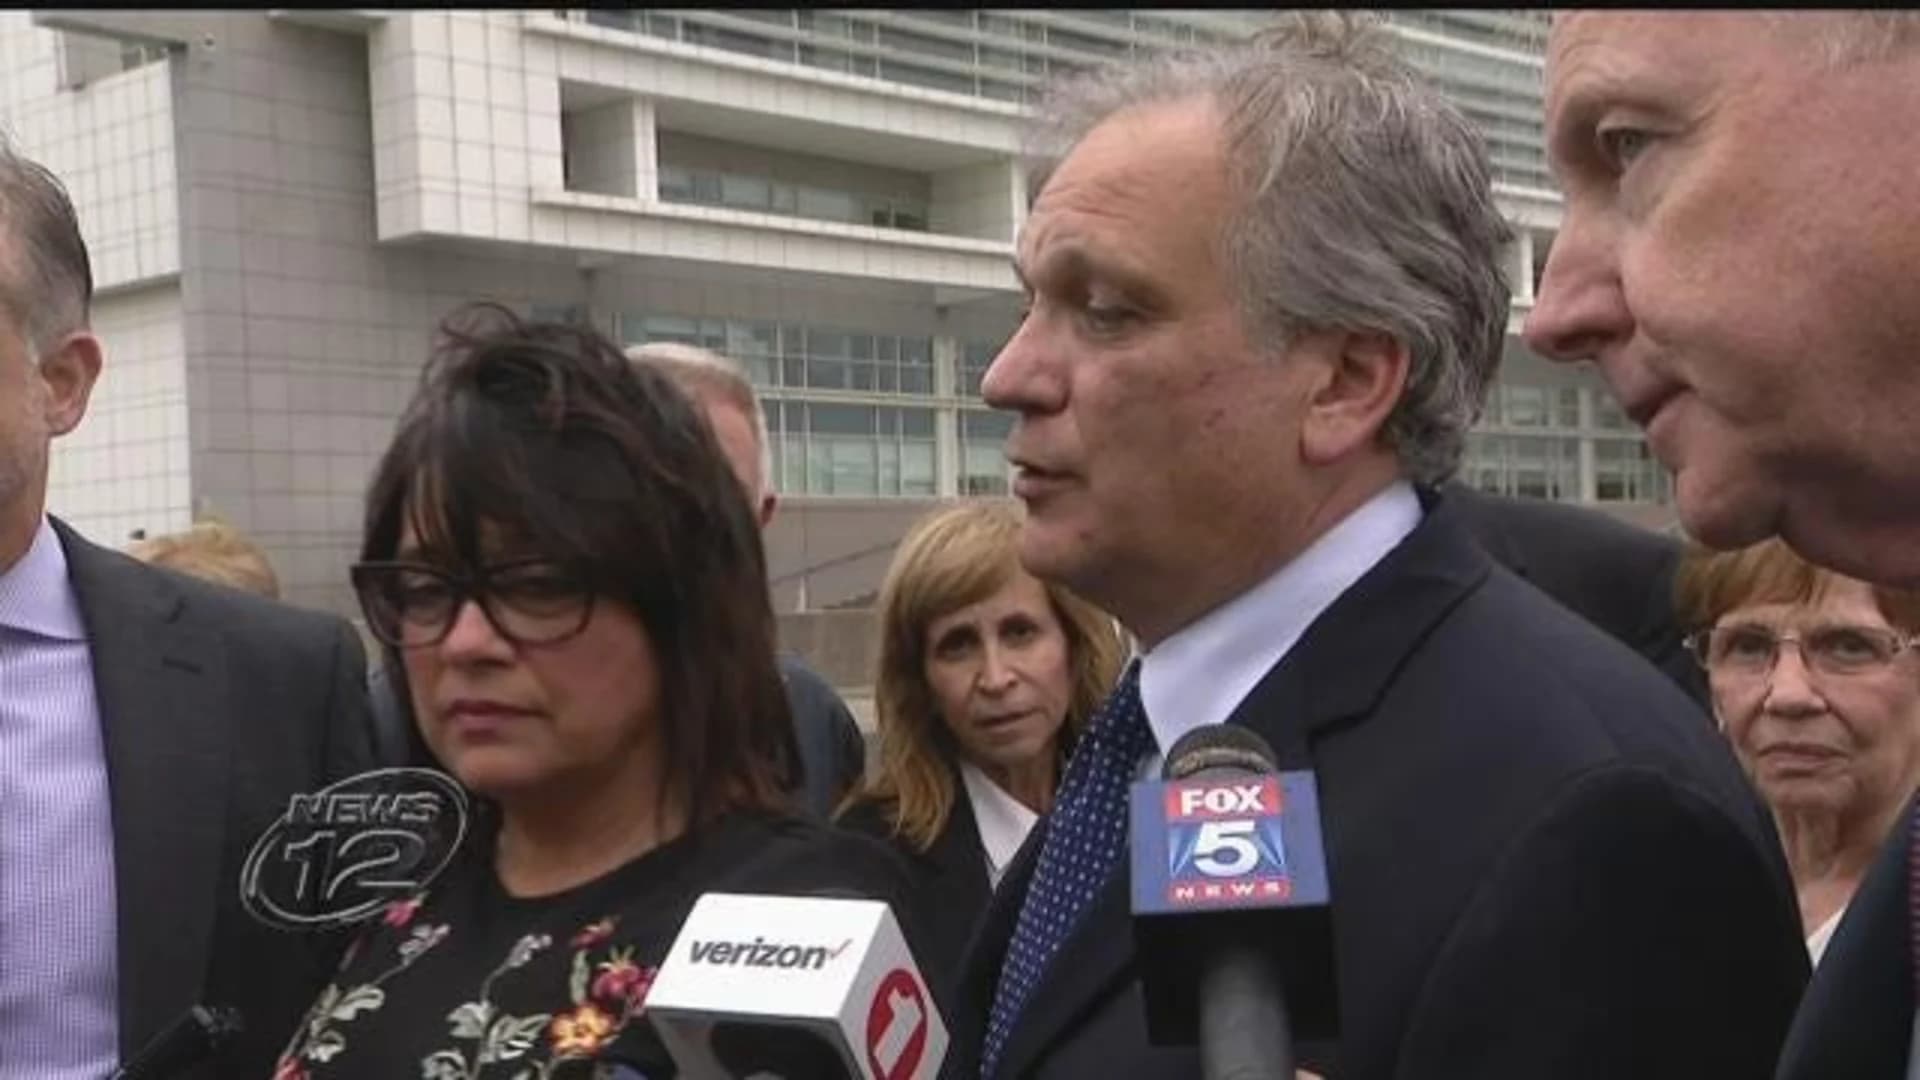 Could there be a plea deal after Mangano mistrial?